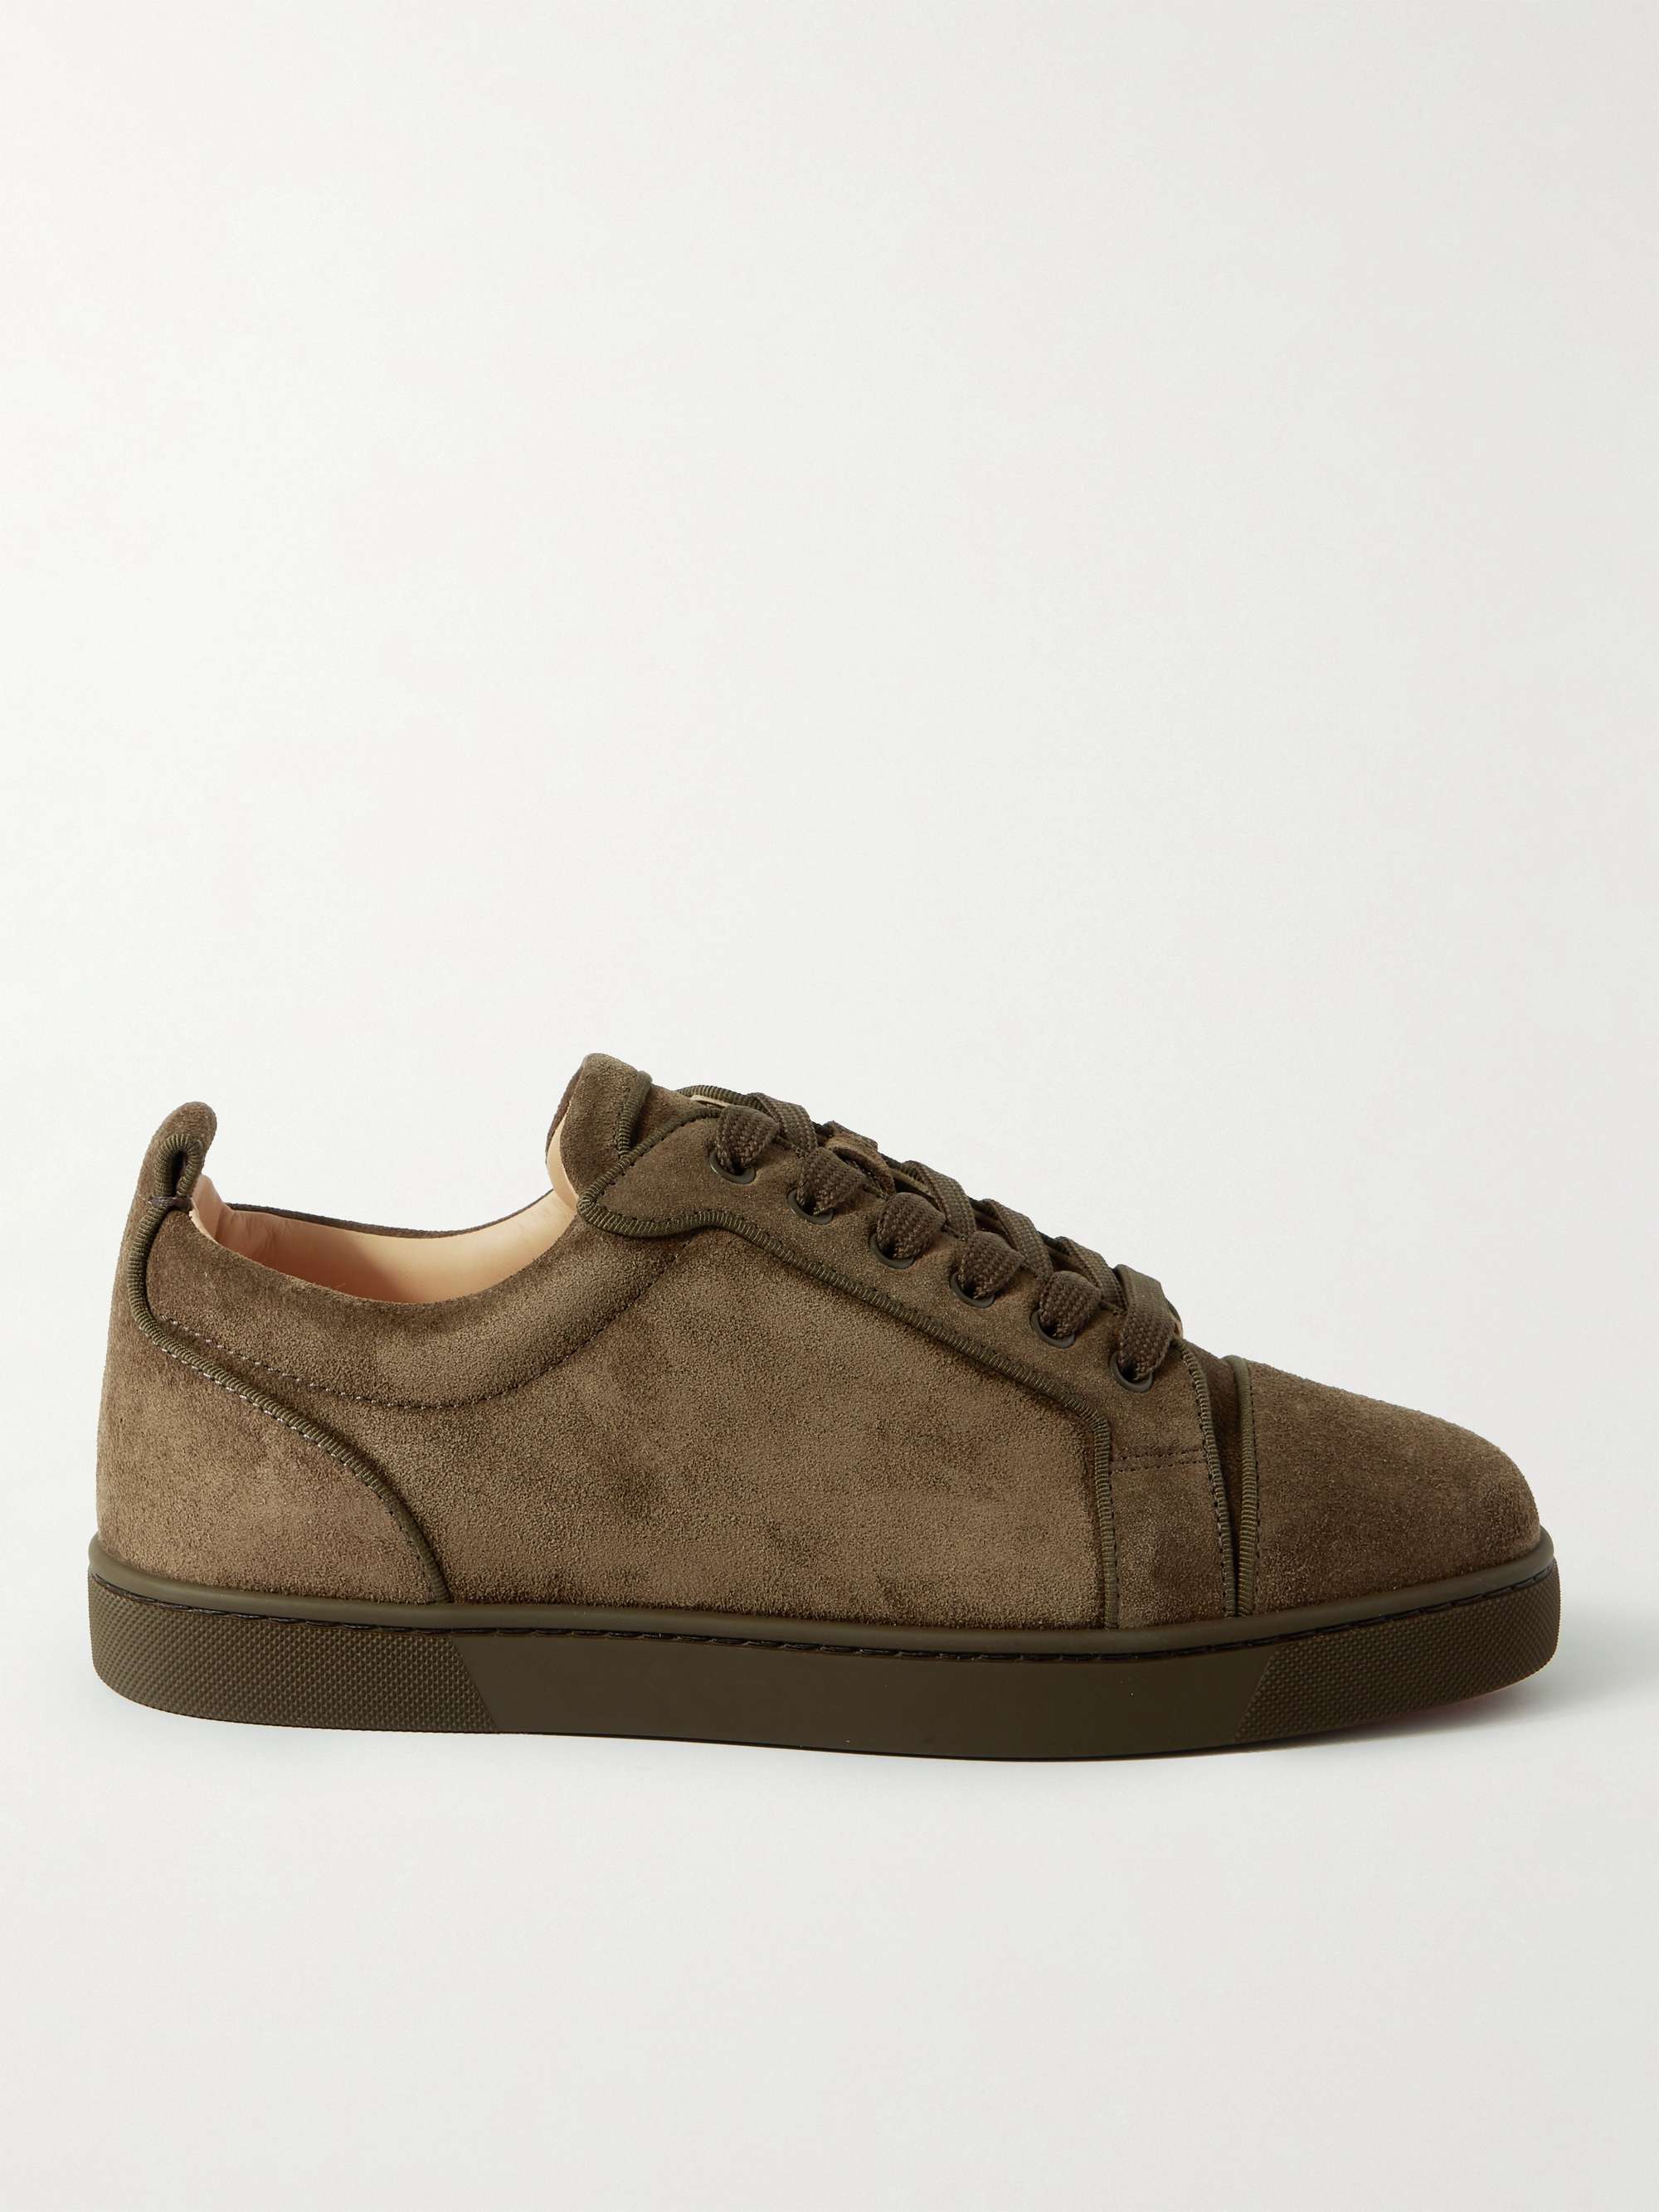 CHRISTIAN LOUBOUTIN Louis Suede Sneakers | MR